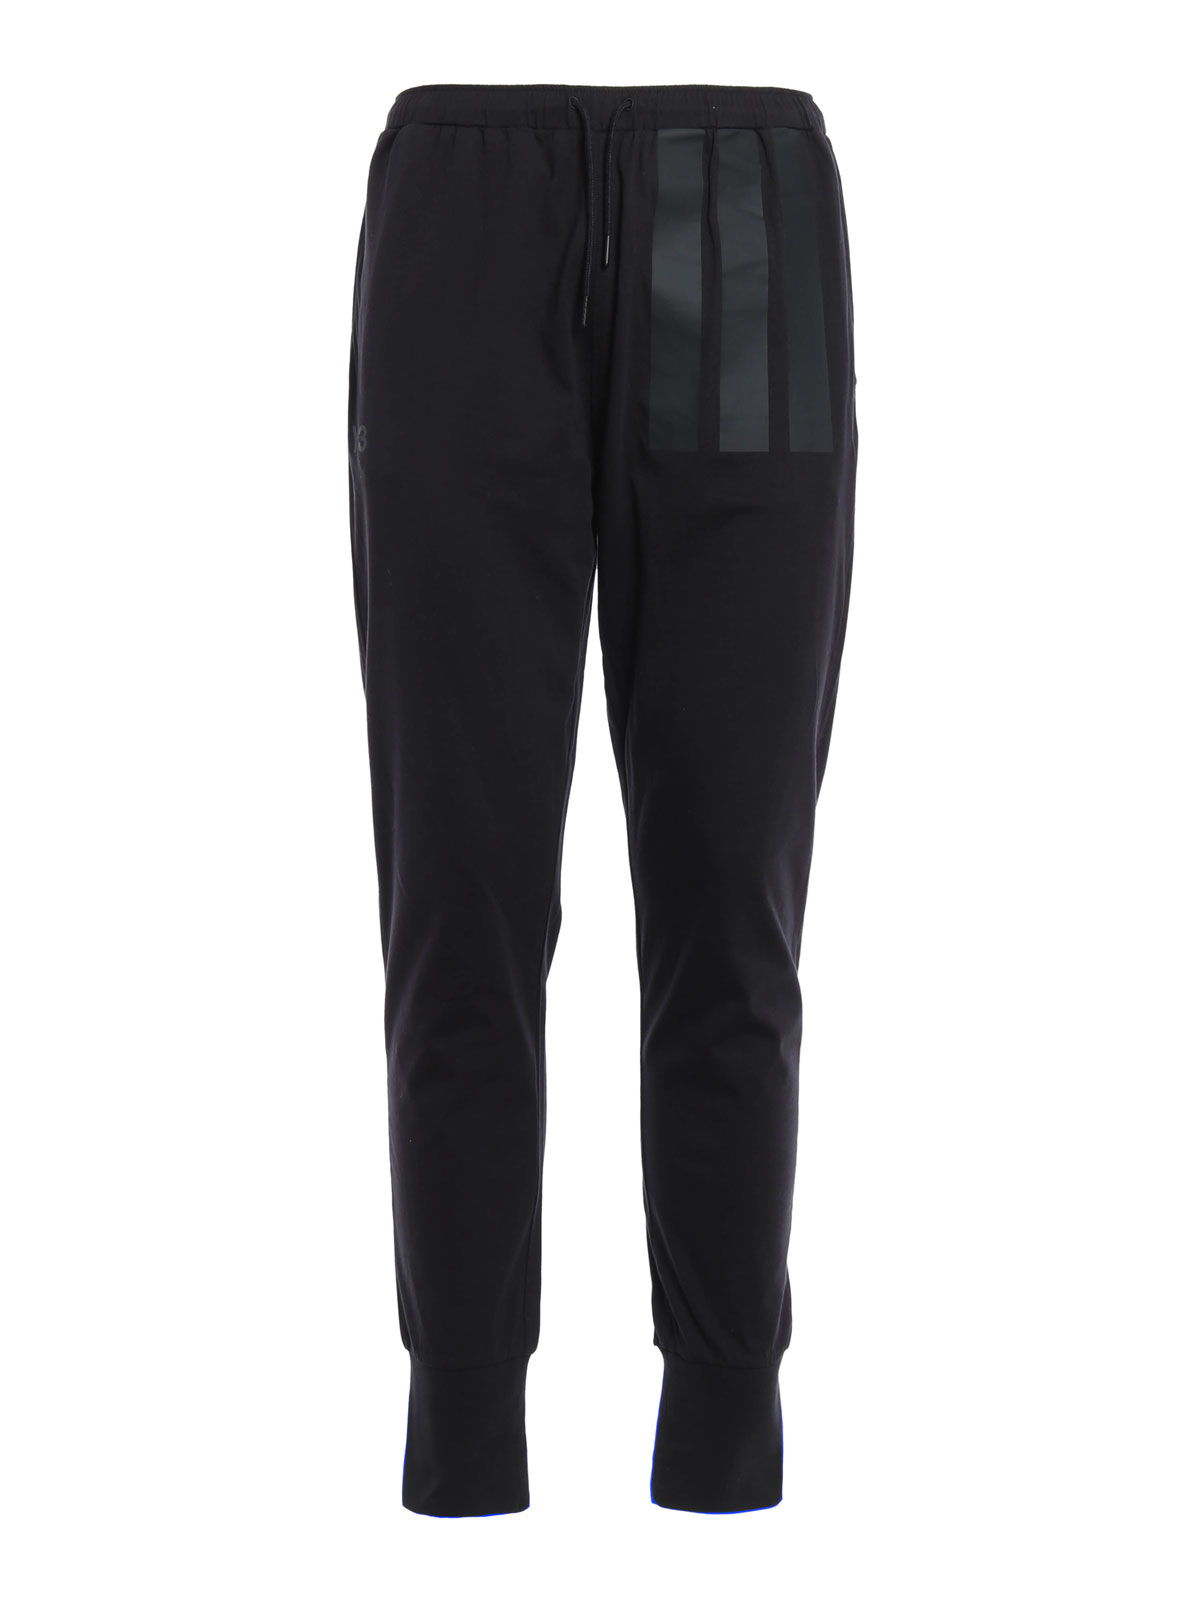 y3 tracksuit bottoms